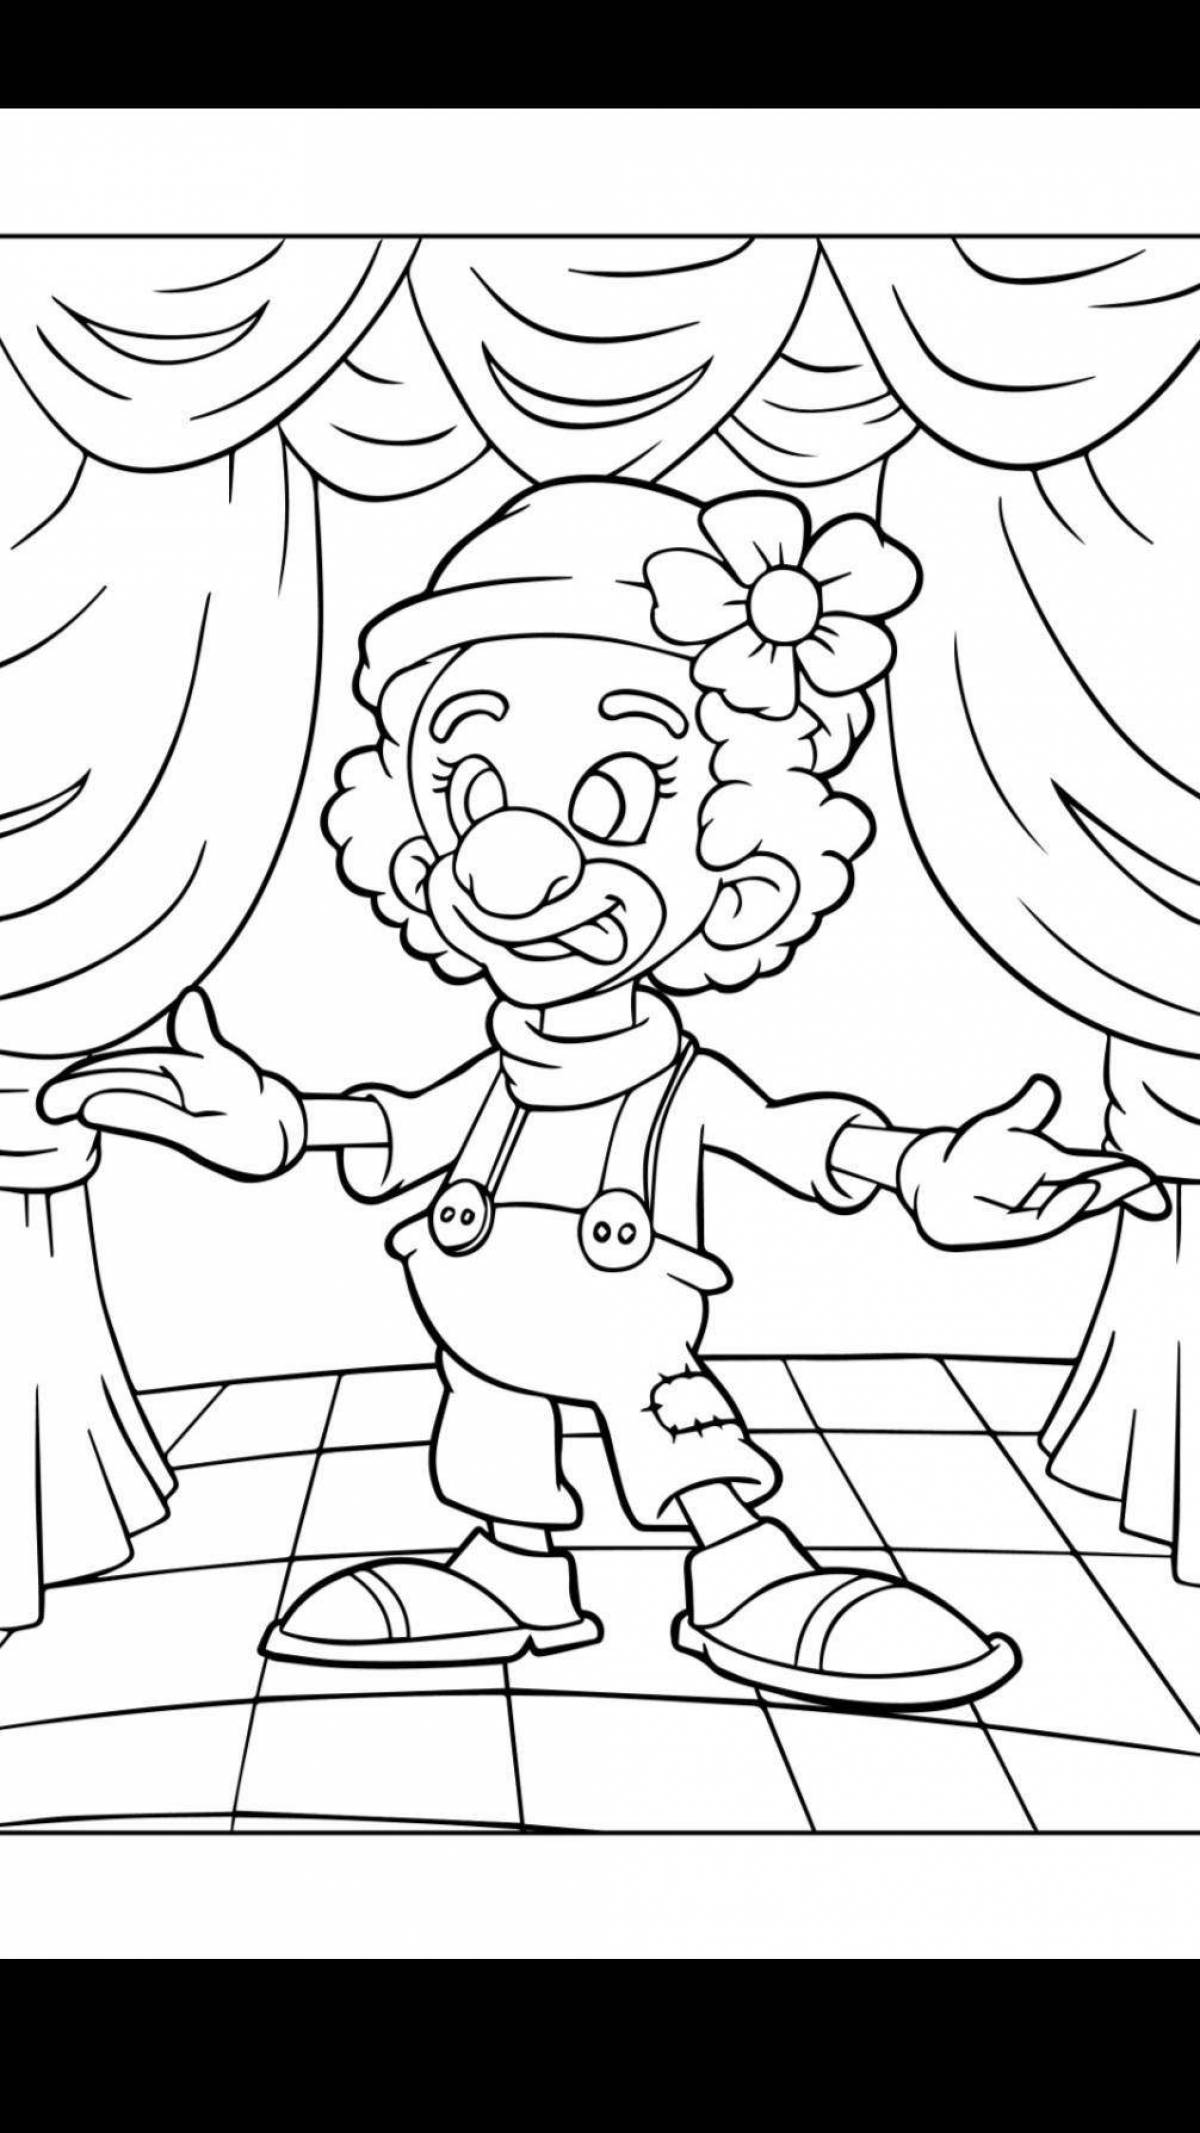 Adorable circus child coloring page